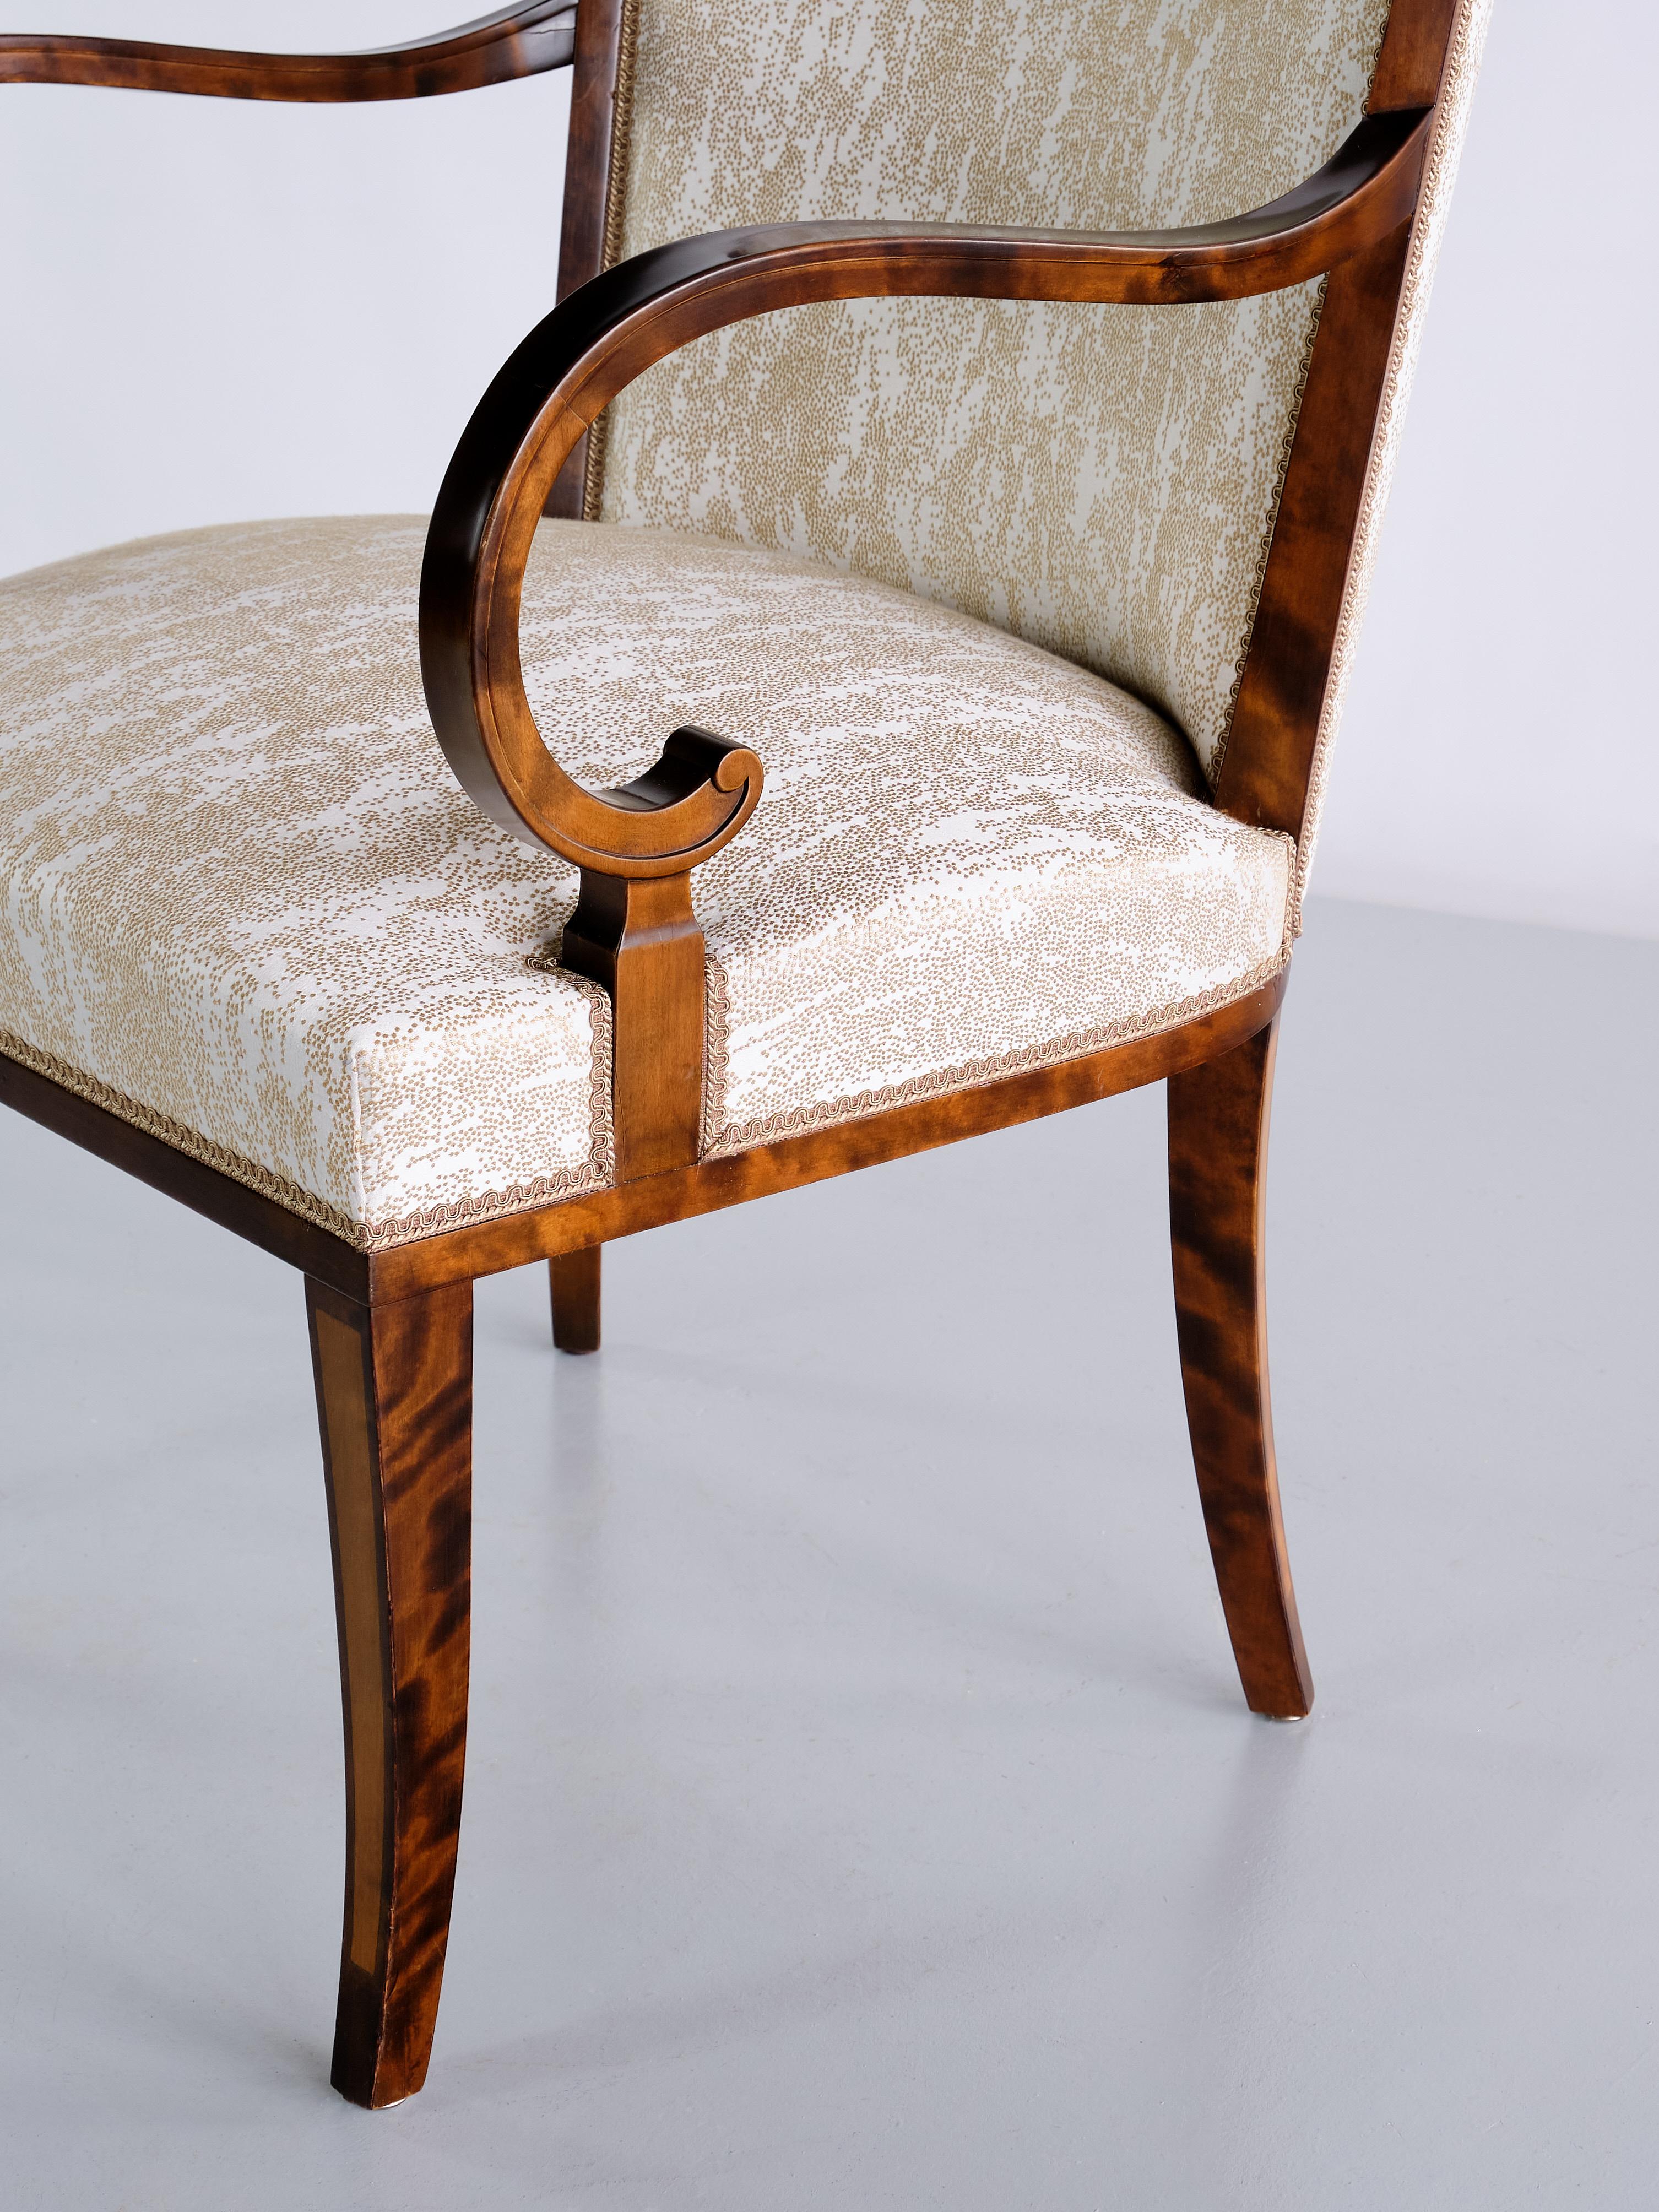 Pair of Carl Malmsten Armchairs in Birch and Satinwood, Bodafors, Sweden, 1930s For Sale 8